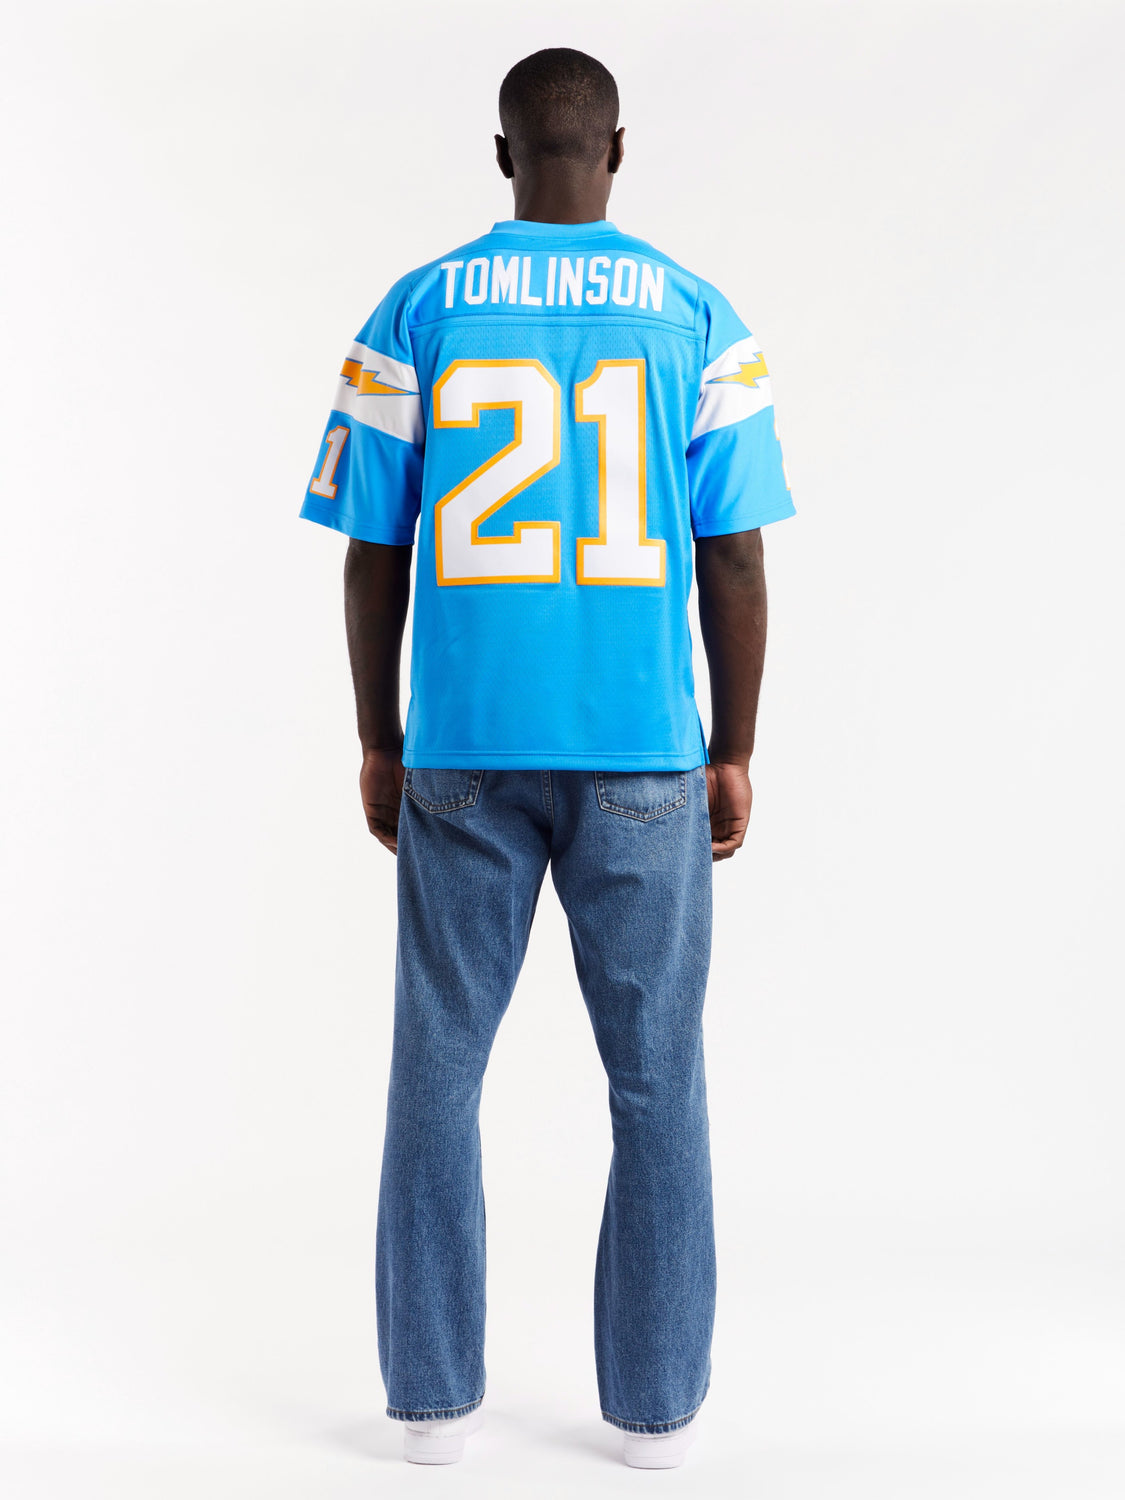 Mitchell & Ness SAN DIEGO CHARGERS LEGACY JERSEY - LADAINIAN